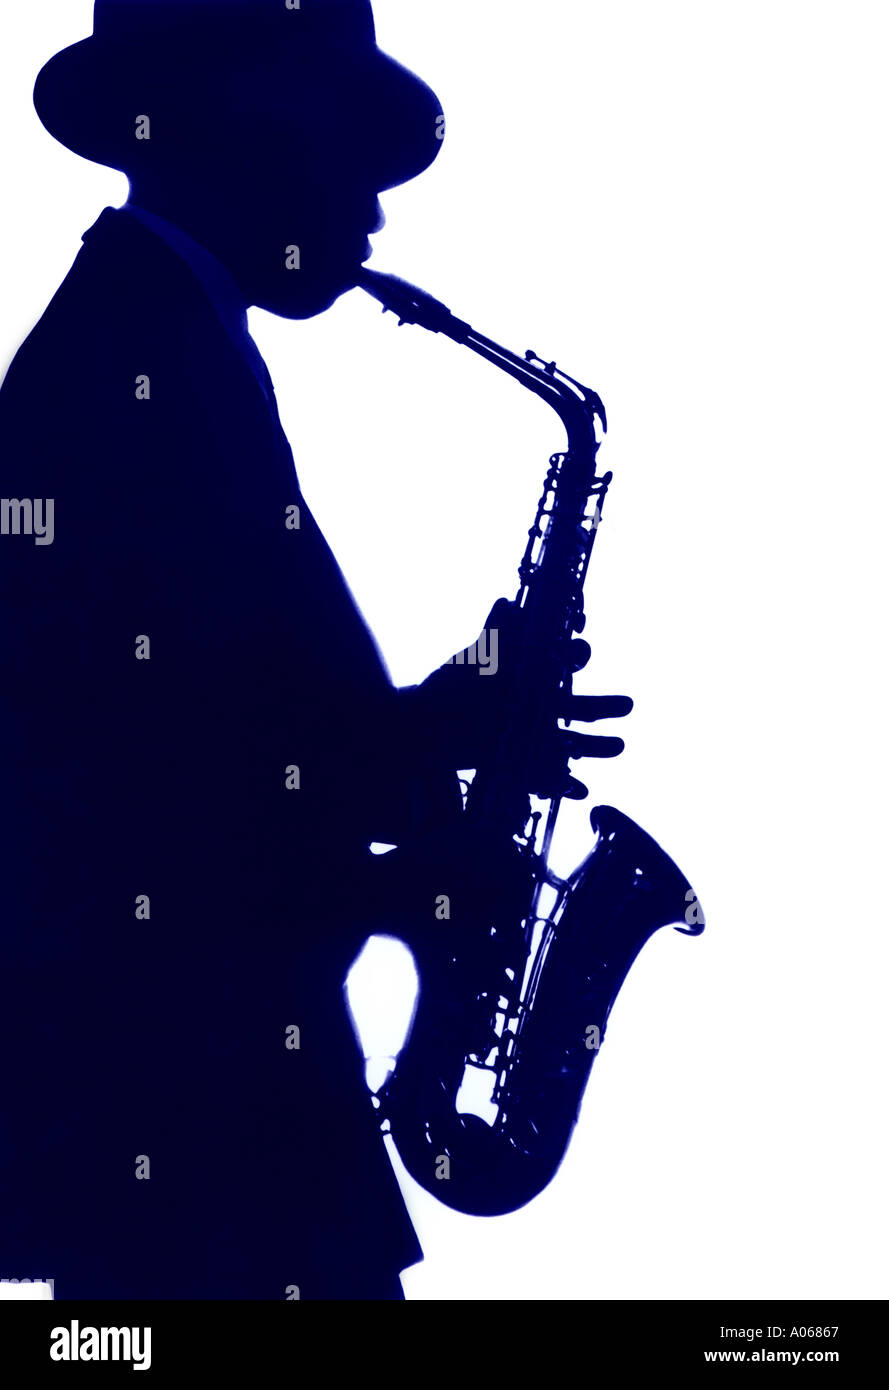 Silhouette of man playing saxophone. Banque D'Images